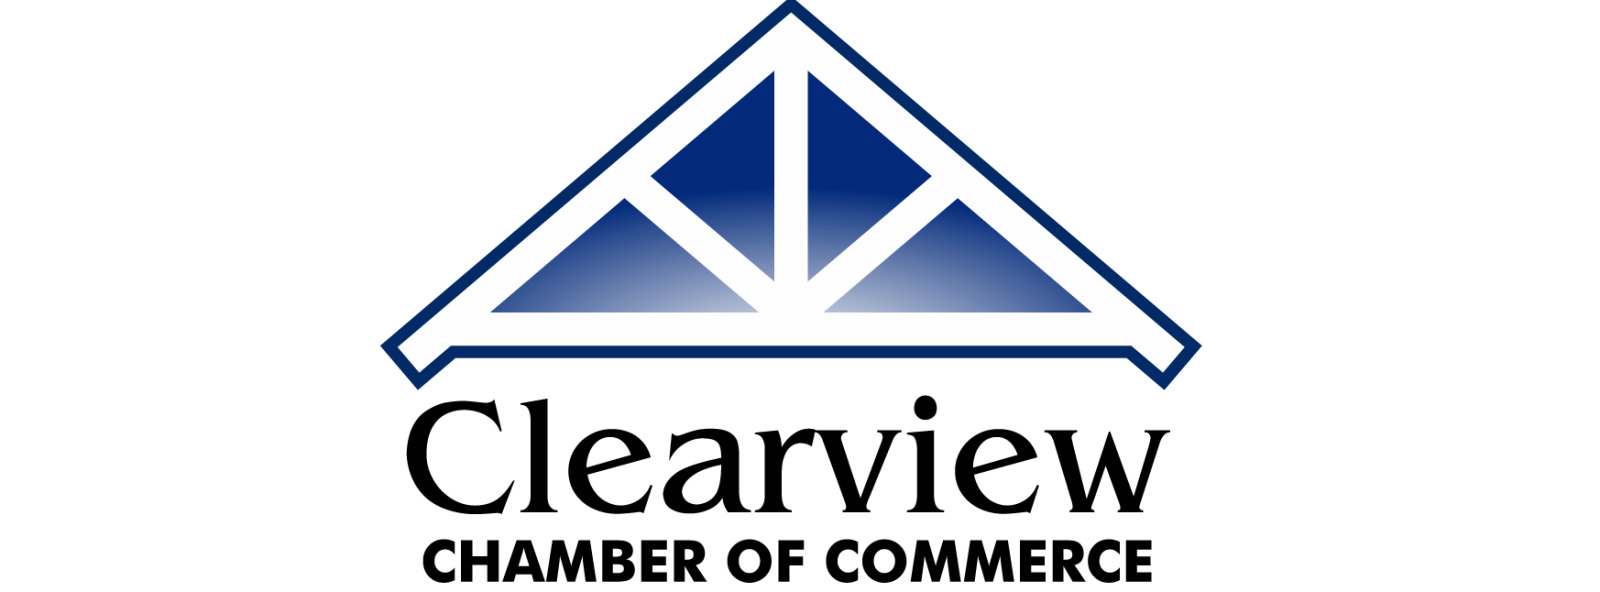 Clearview Chamber of Commerce